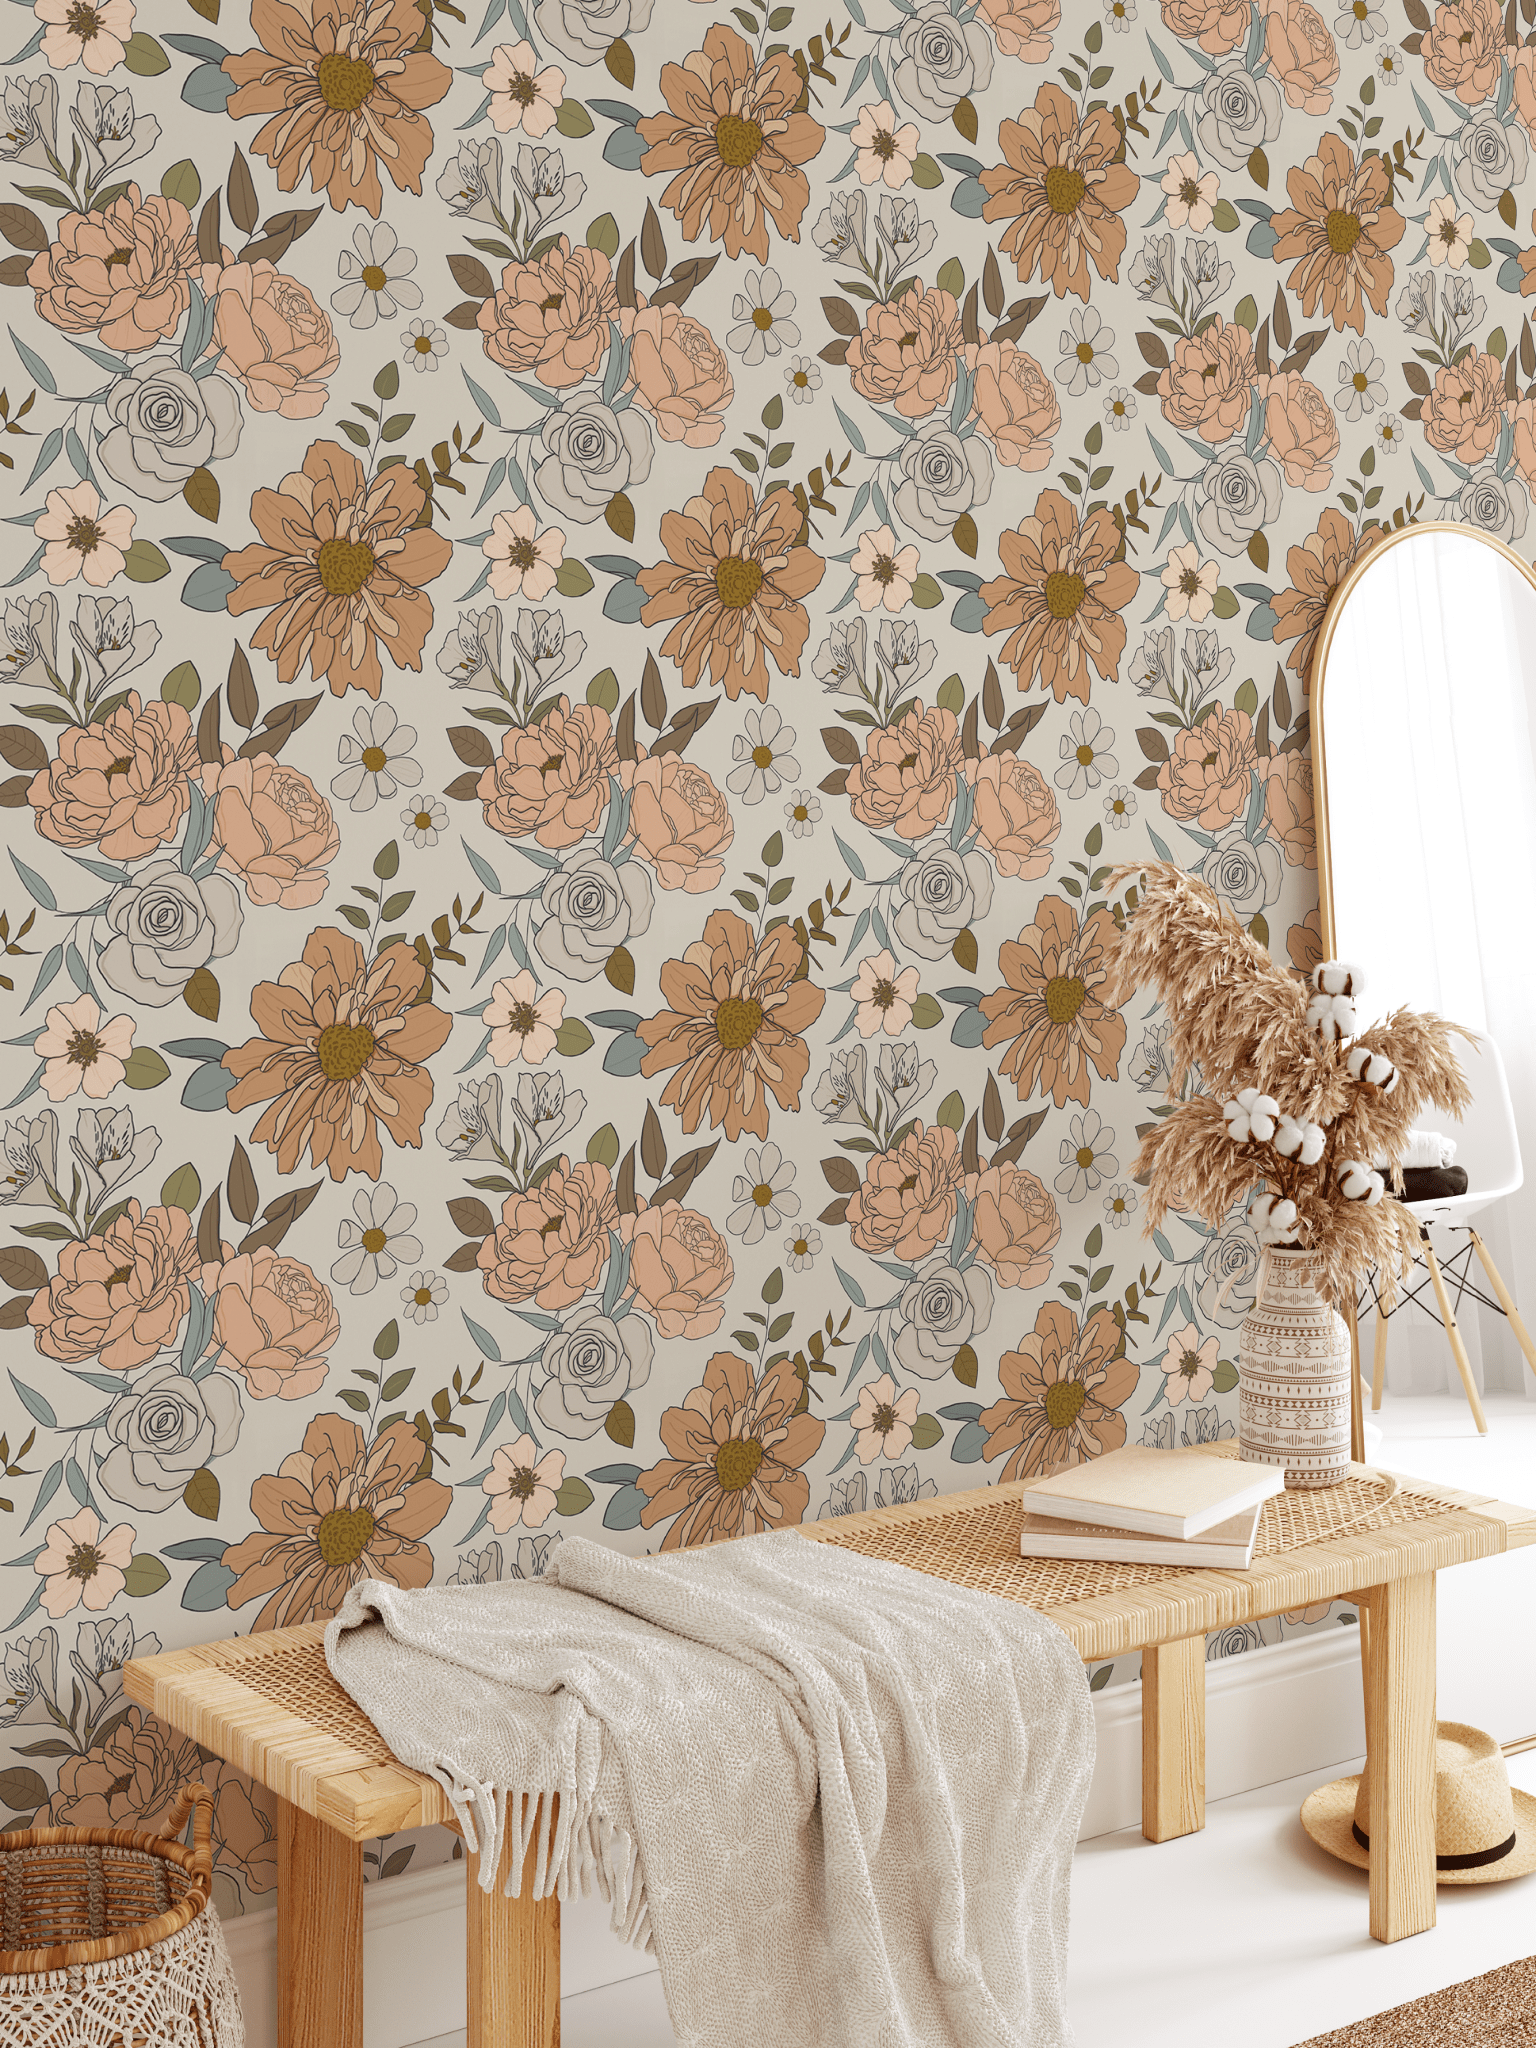 Ditsy Floral Bohemian Peel and Stick Wallpaper for Home Decor removable self adhesive